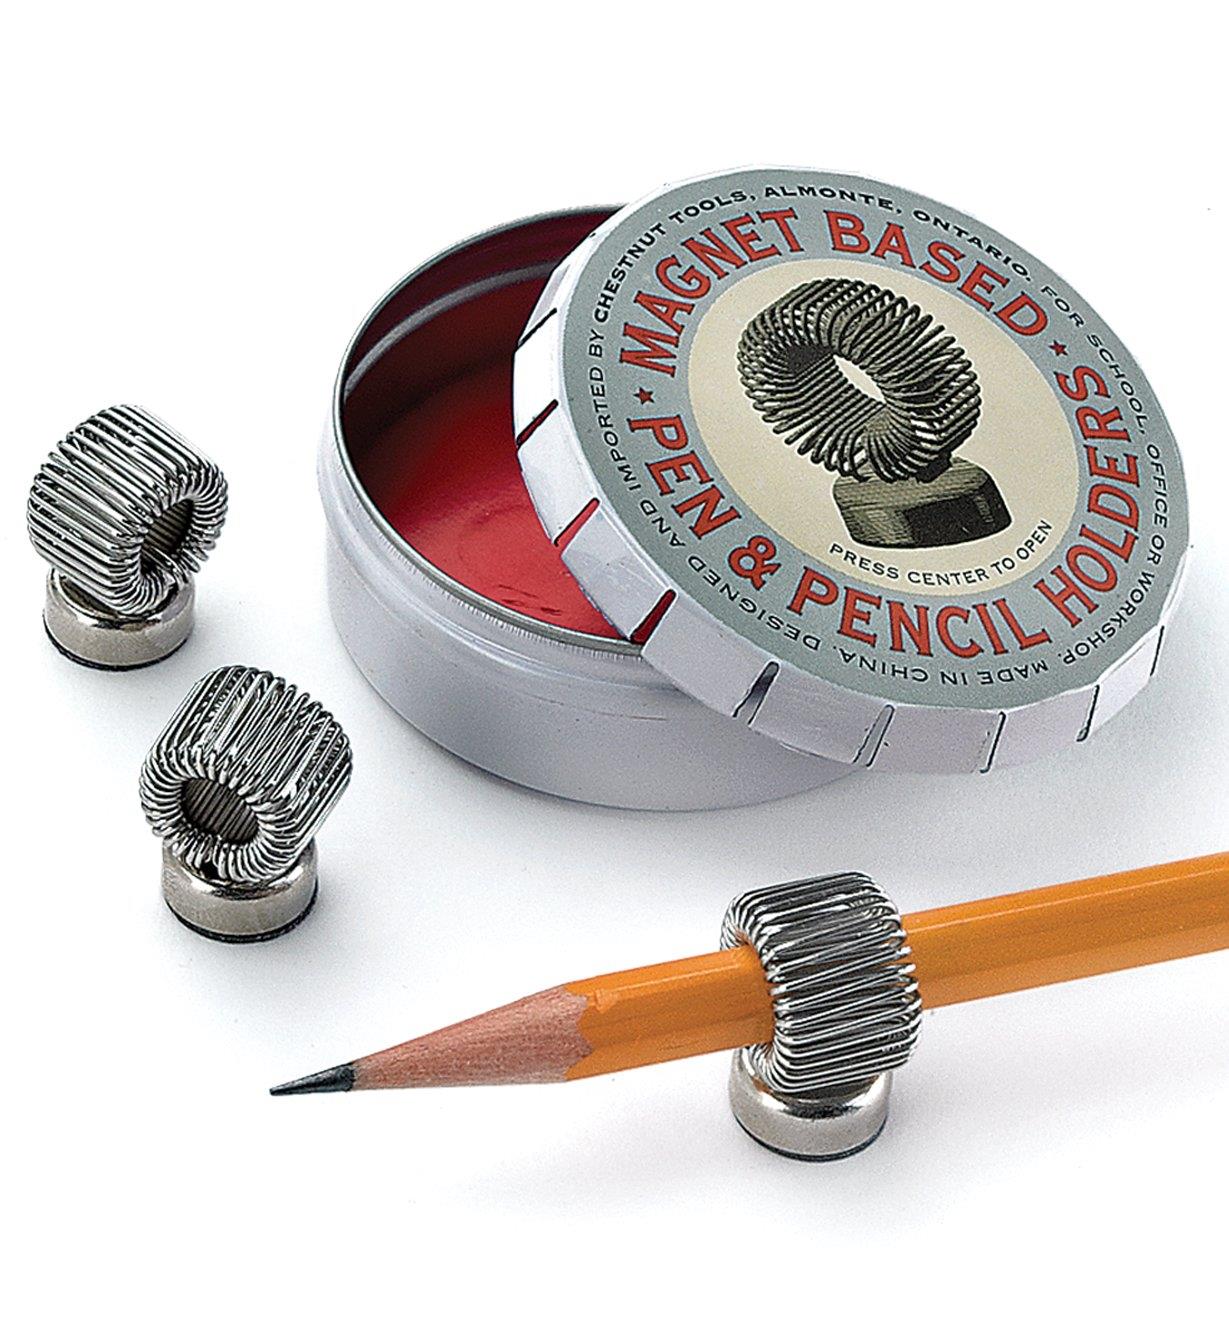 Magnet-Based Pen & Pencil Holders beside the tin, one of them holding a pencil